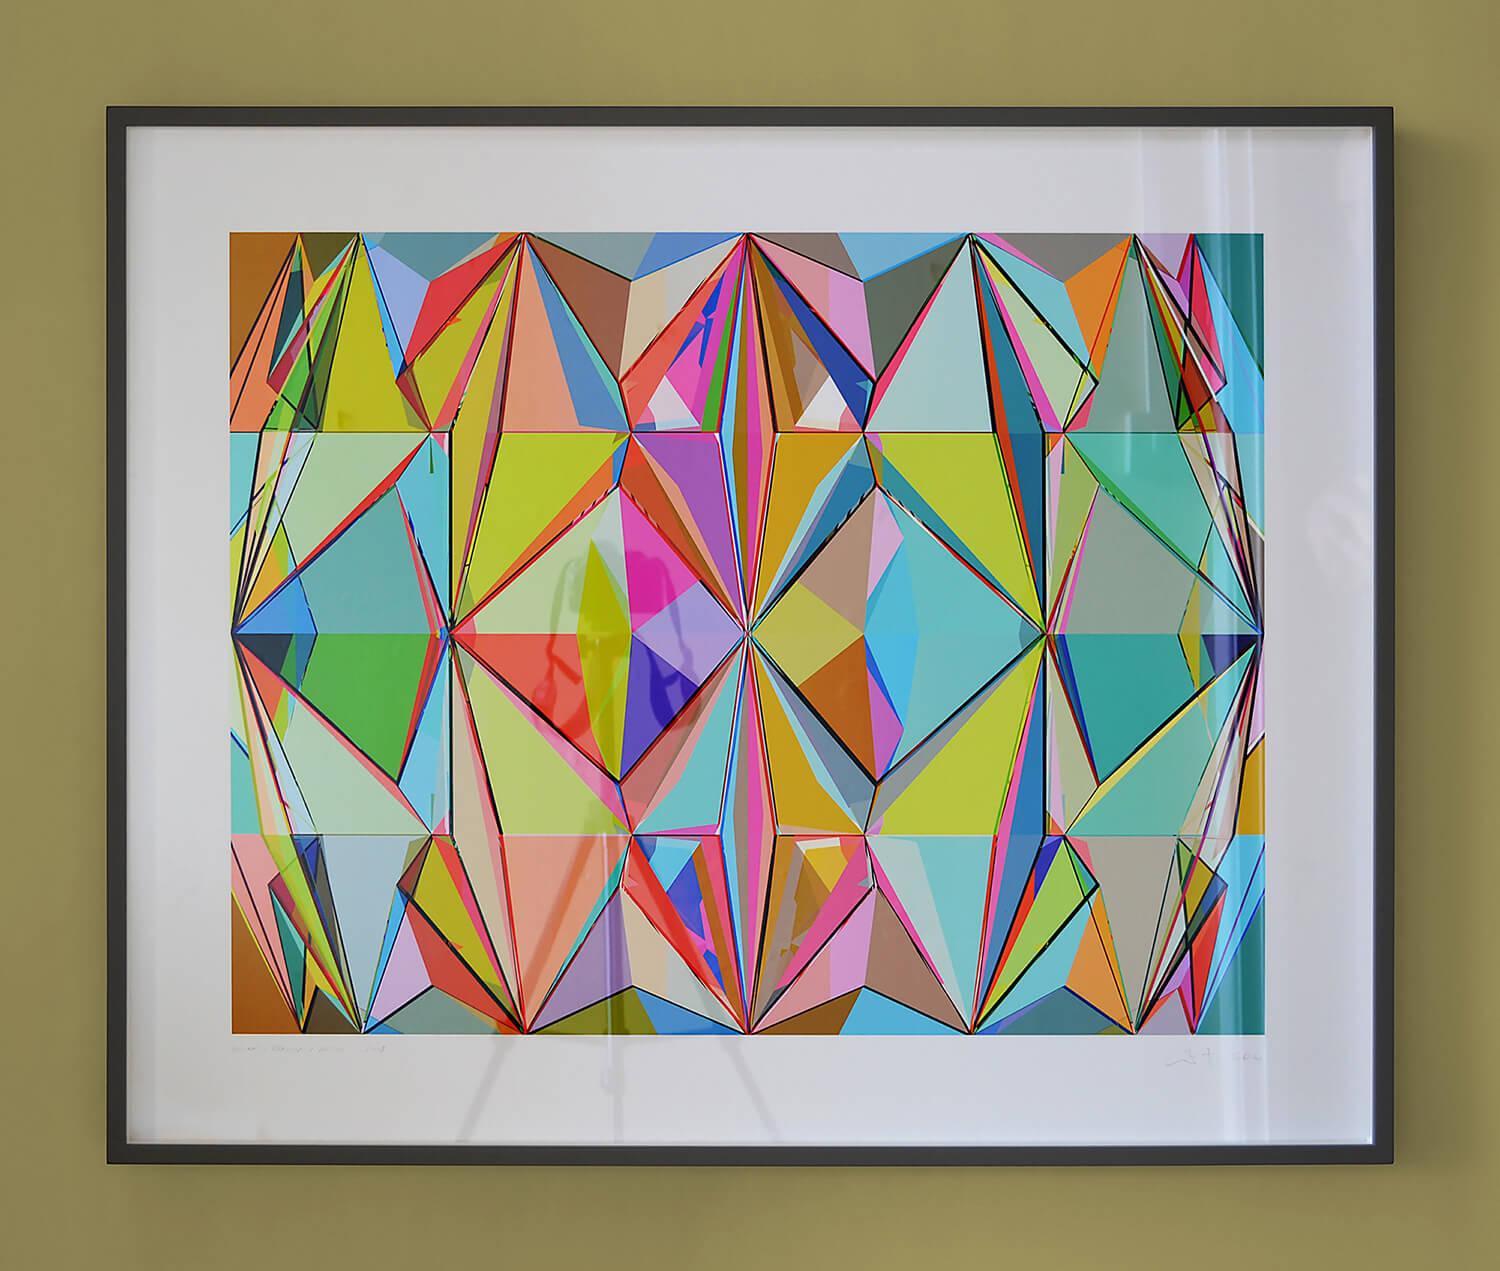 Klint / reDux / acdh is a ten colour archival pigment print on 305gsm, 100% cotton, Hahnemühle fine art paper.

The work can be supplied unframed, or framed and ready to hang. I tend to use fairly minimal glazed and painted tulipwood frames, and set